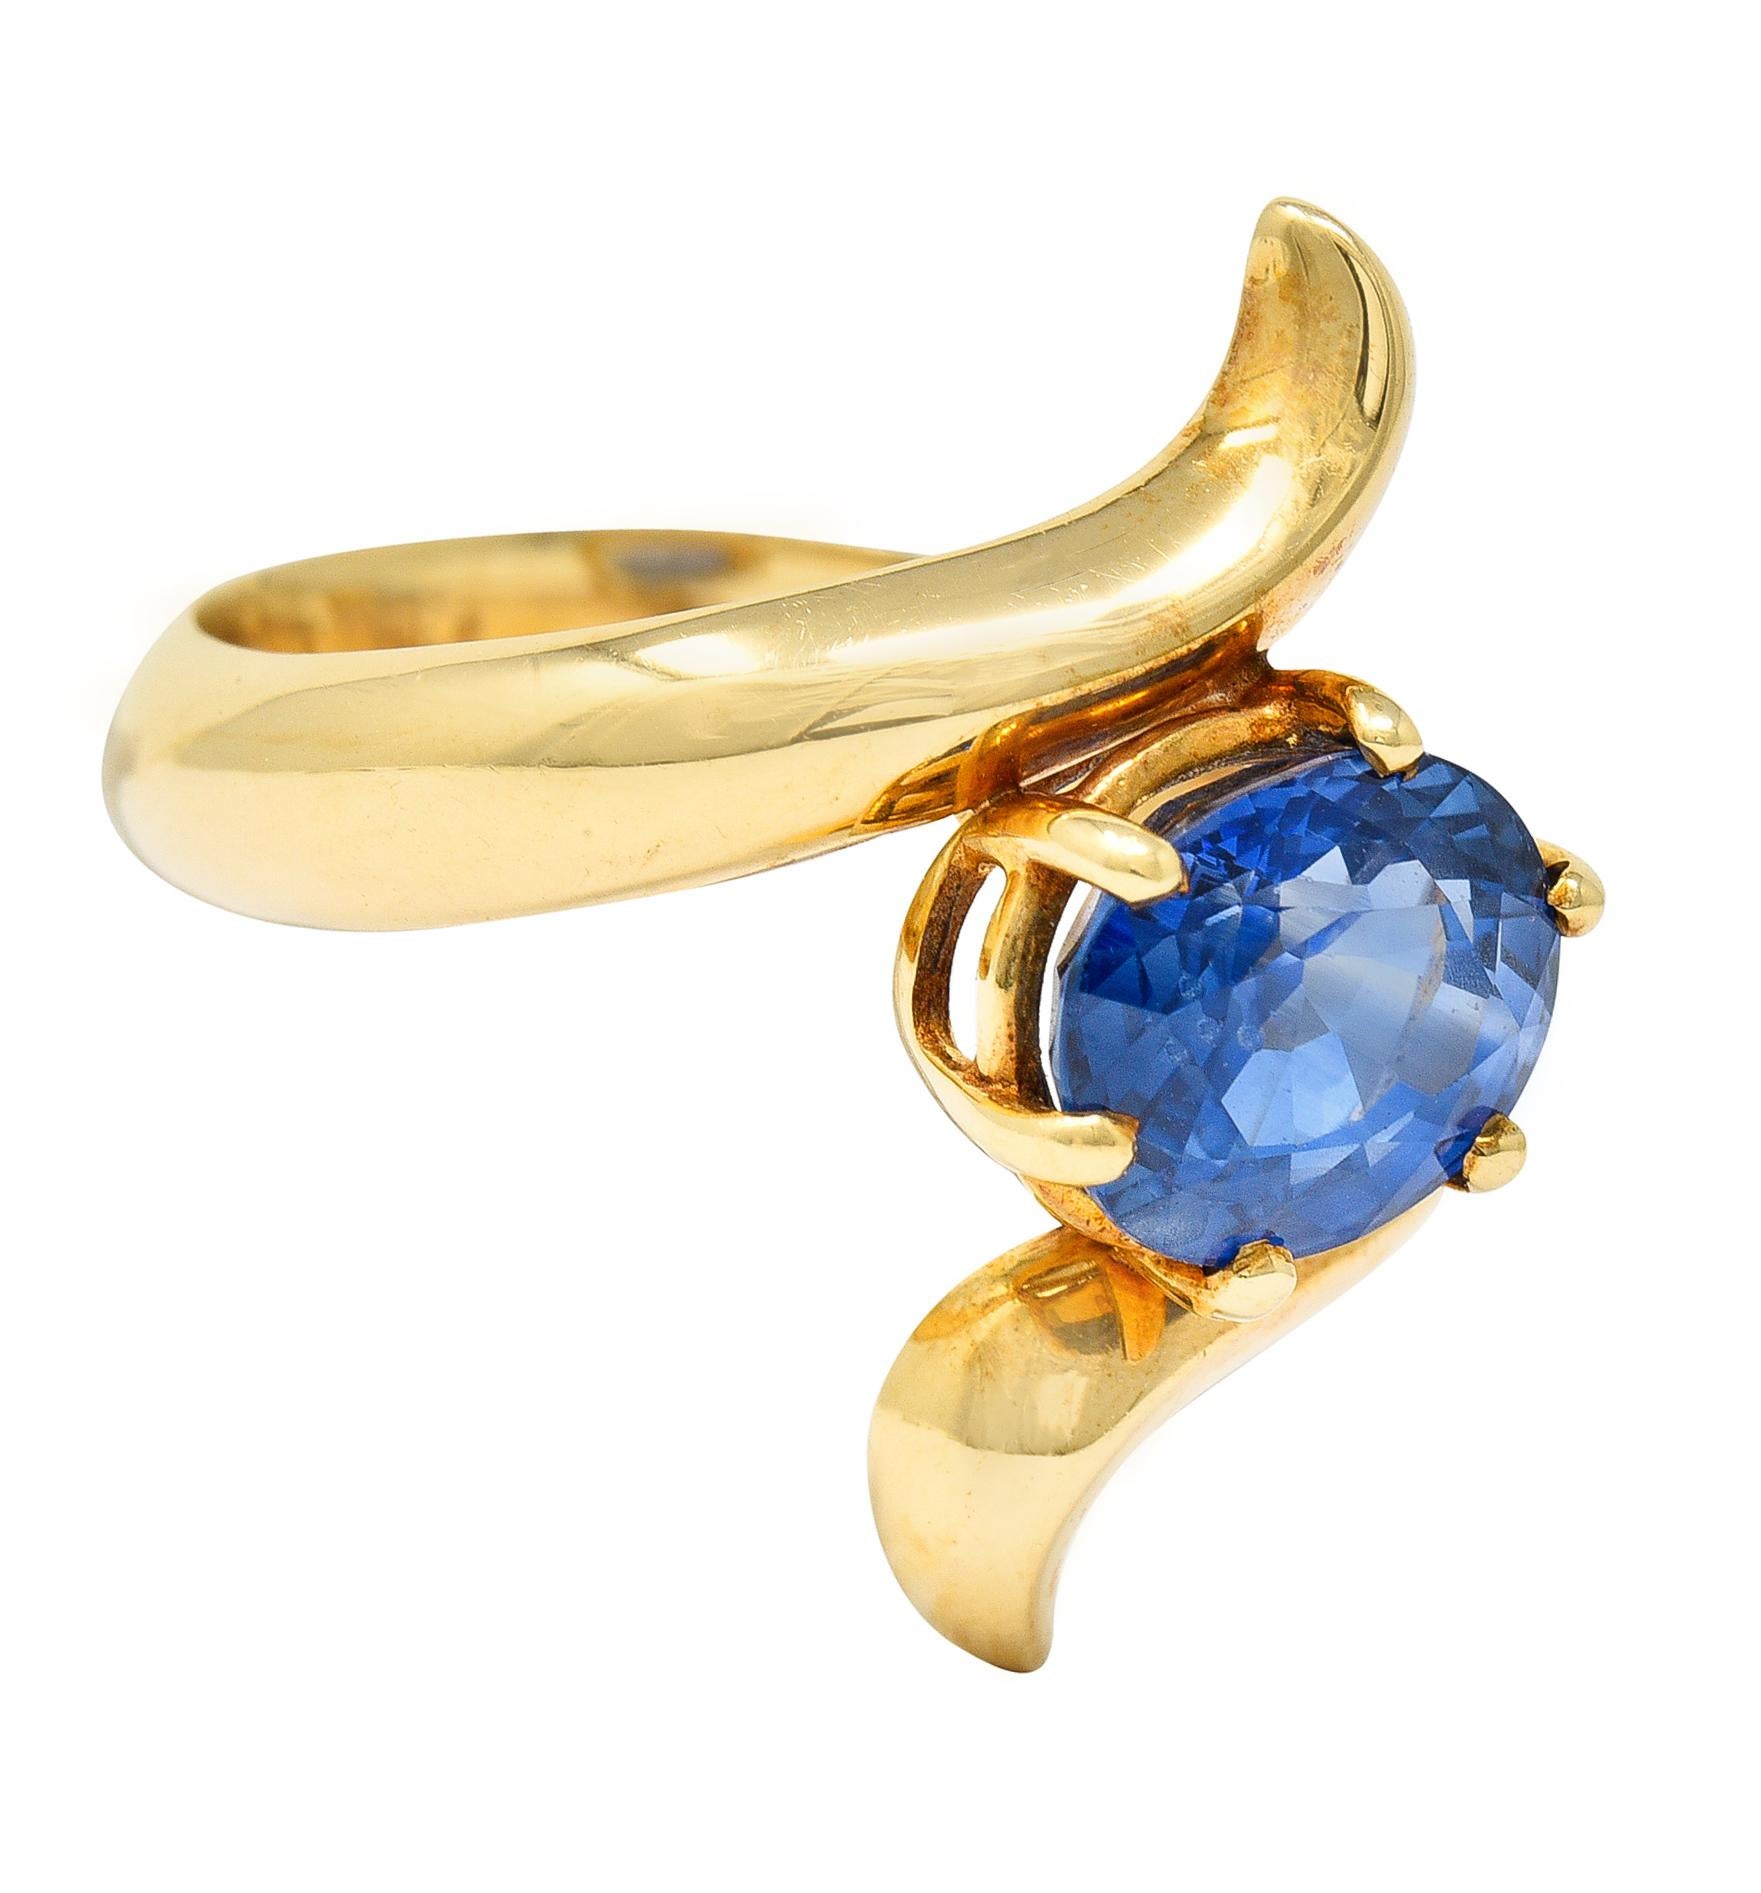 Bypass style ring centers an oval cut sapphire weighing approximately 2.25 carats. Basket set East to West, eye clean, with violetish blue color. Flanked North and South by stylized and scrolling gold tendril shoulders. With maker's mark and stamped